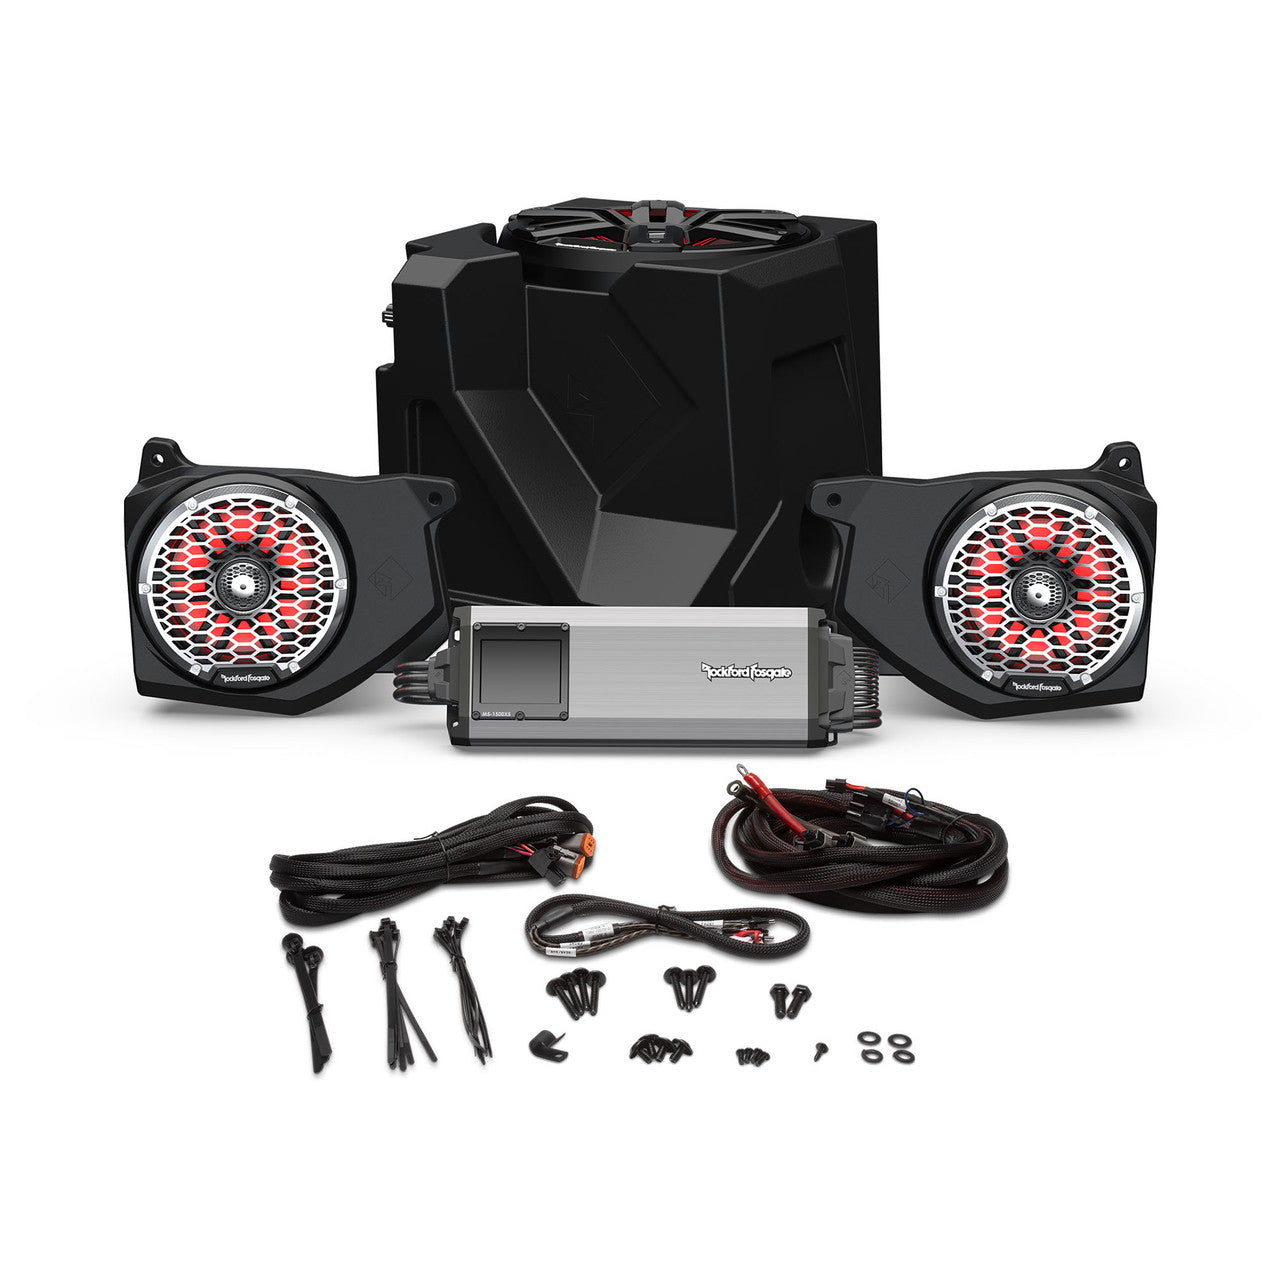 Rockford Fosgate RNGR18-STG5 1500 Watt 5-Channel Amplifier, High Powered Color Optix Front & Sub Kit Compatible With Select 2018 and up Polaris Ranger Models with Ride Command